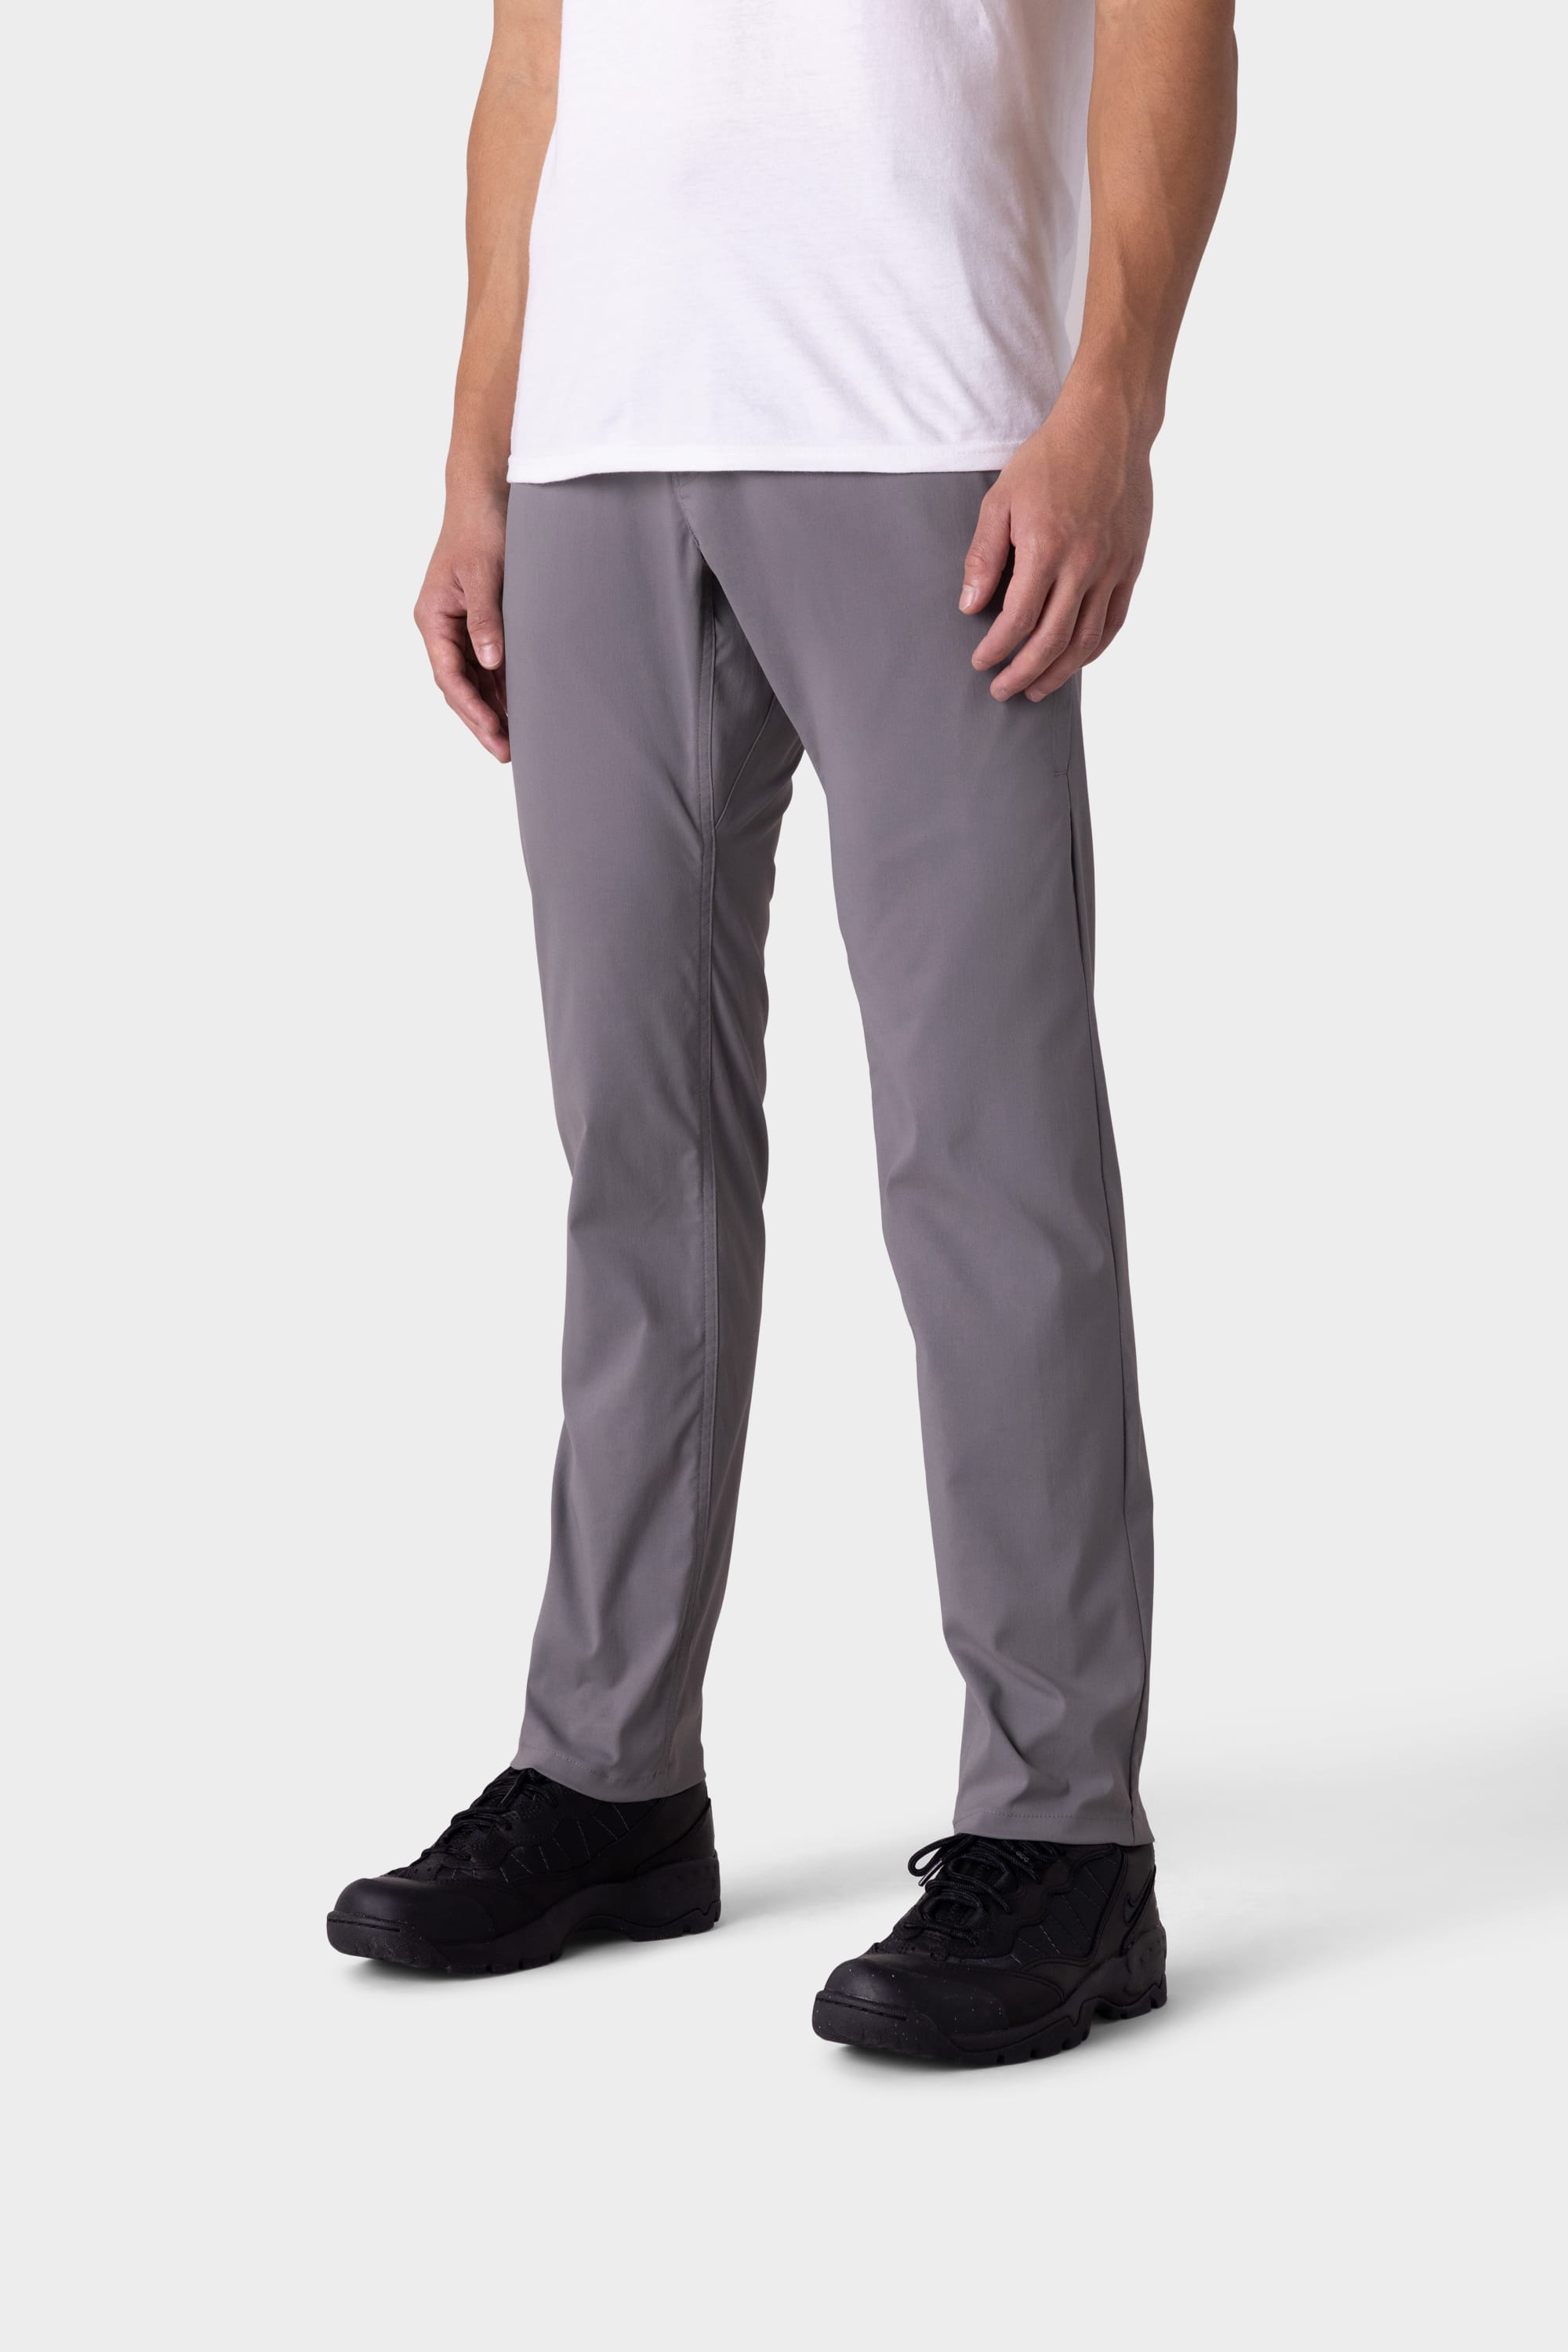 Comparison between On The Fly Pants (4) and Keep Moving Pants (2) : r/ lululemon